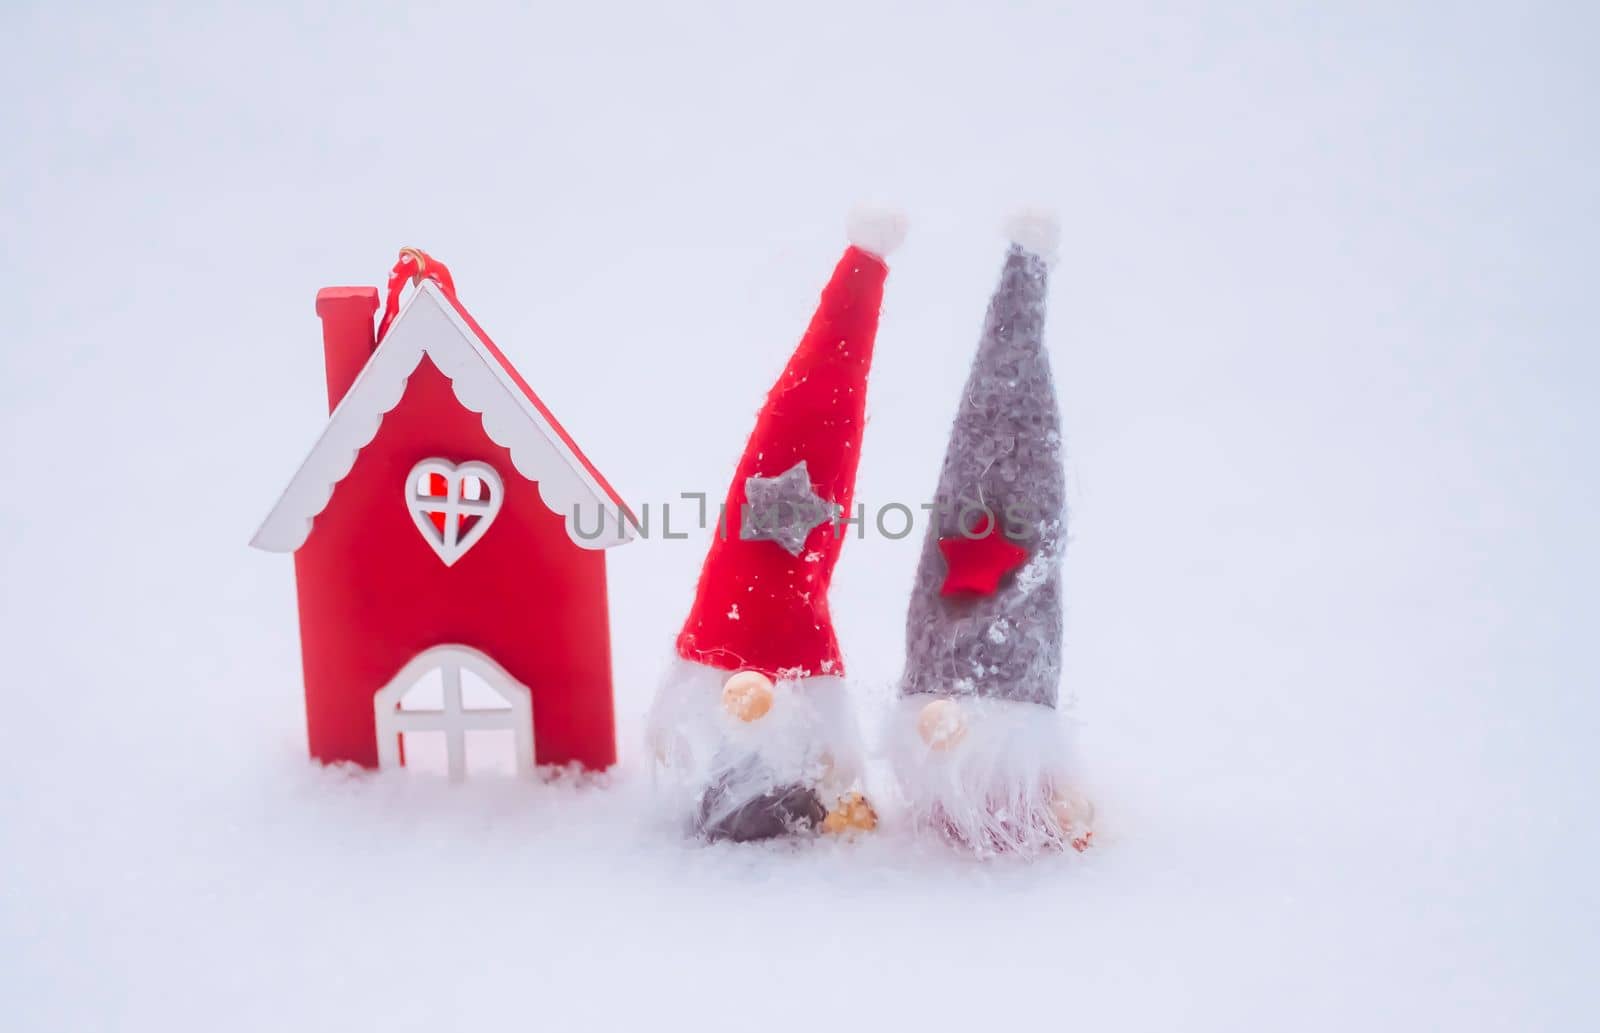 Cute gnomes in red hat and red house figure. Decorative Christmas toys.